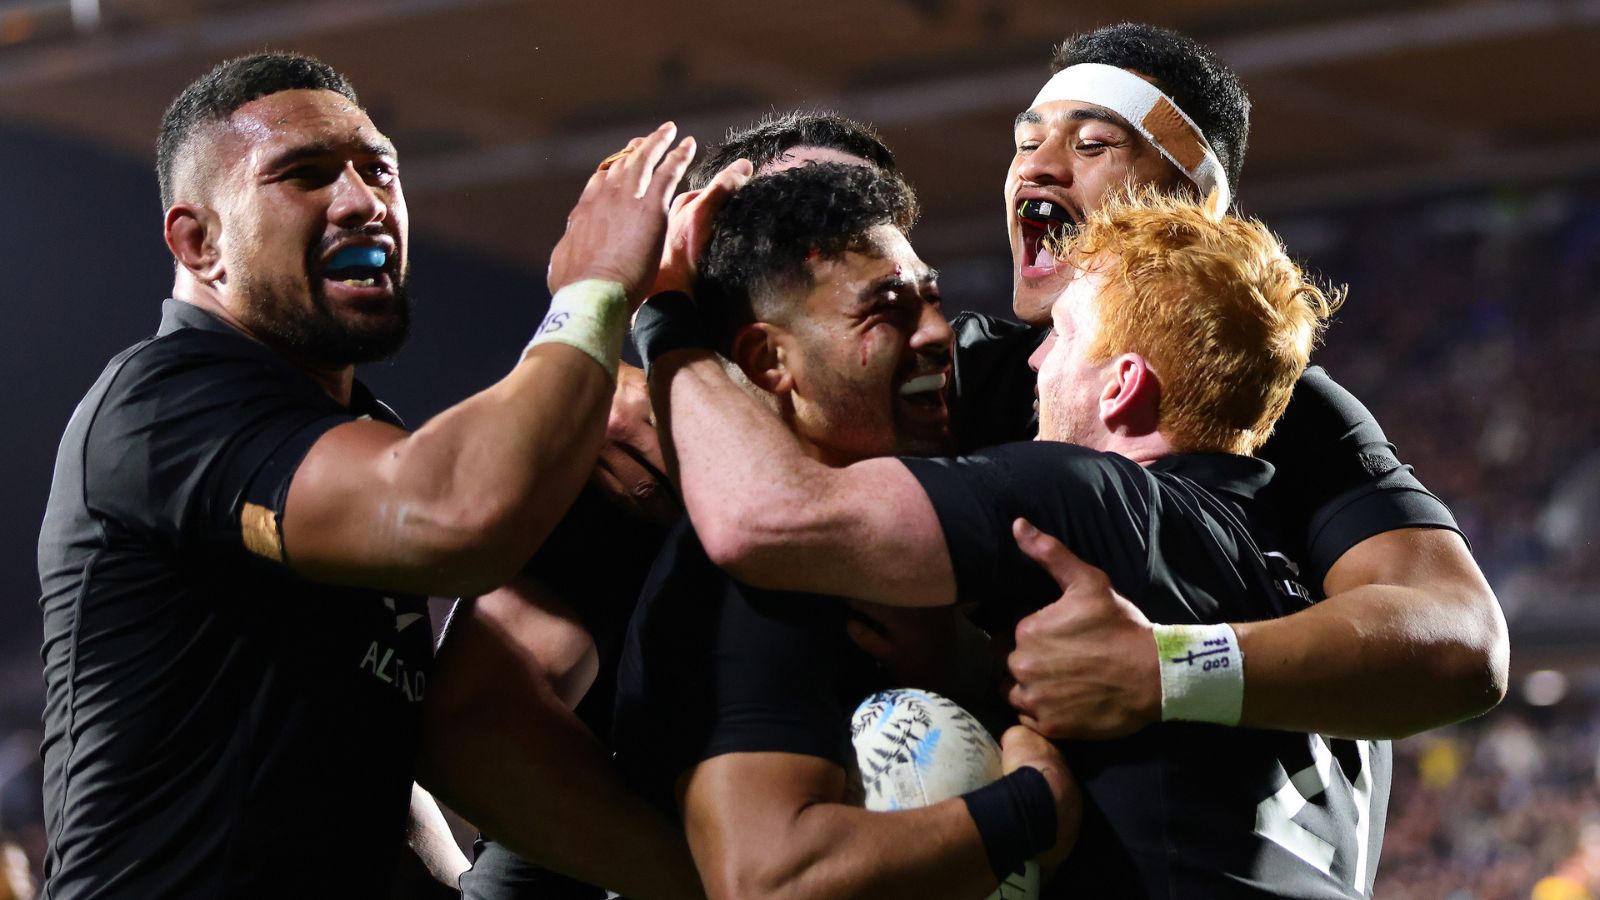 The All Blacks Need to Play More Open and Exciting Rugby, Breaking from their Usual Style